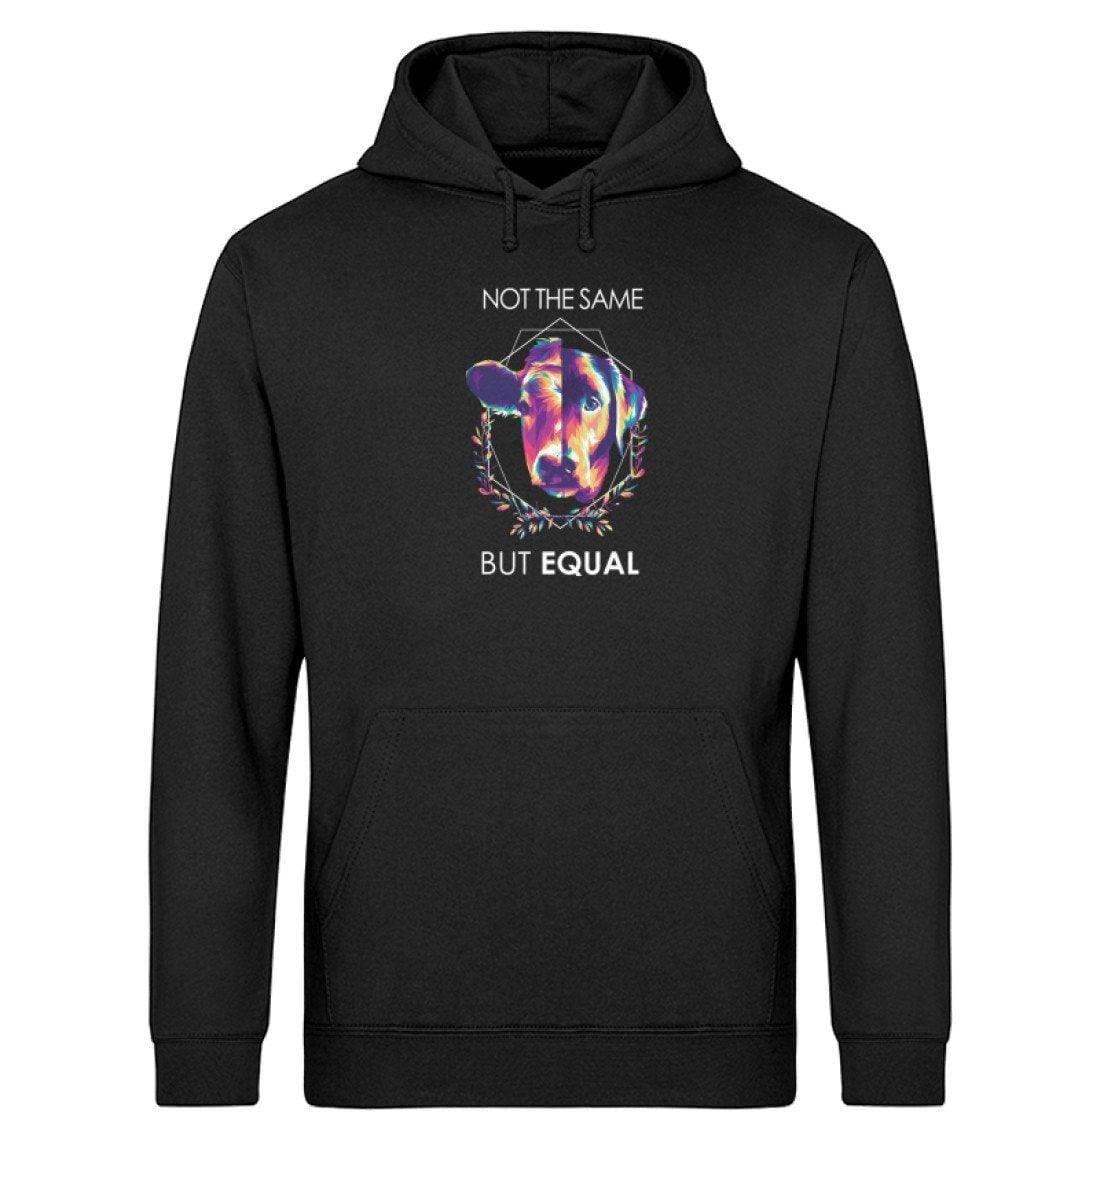 Not the same but equal - Unisex Organic Hoodie - M, XL